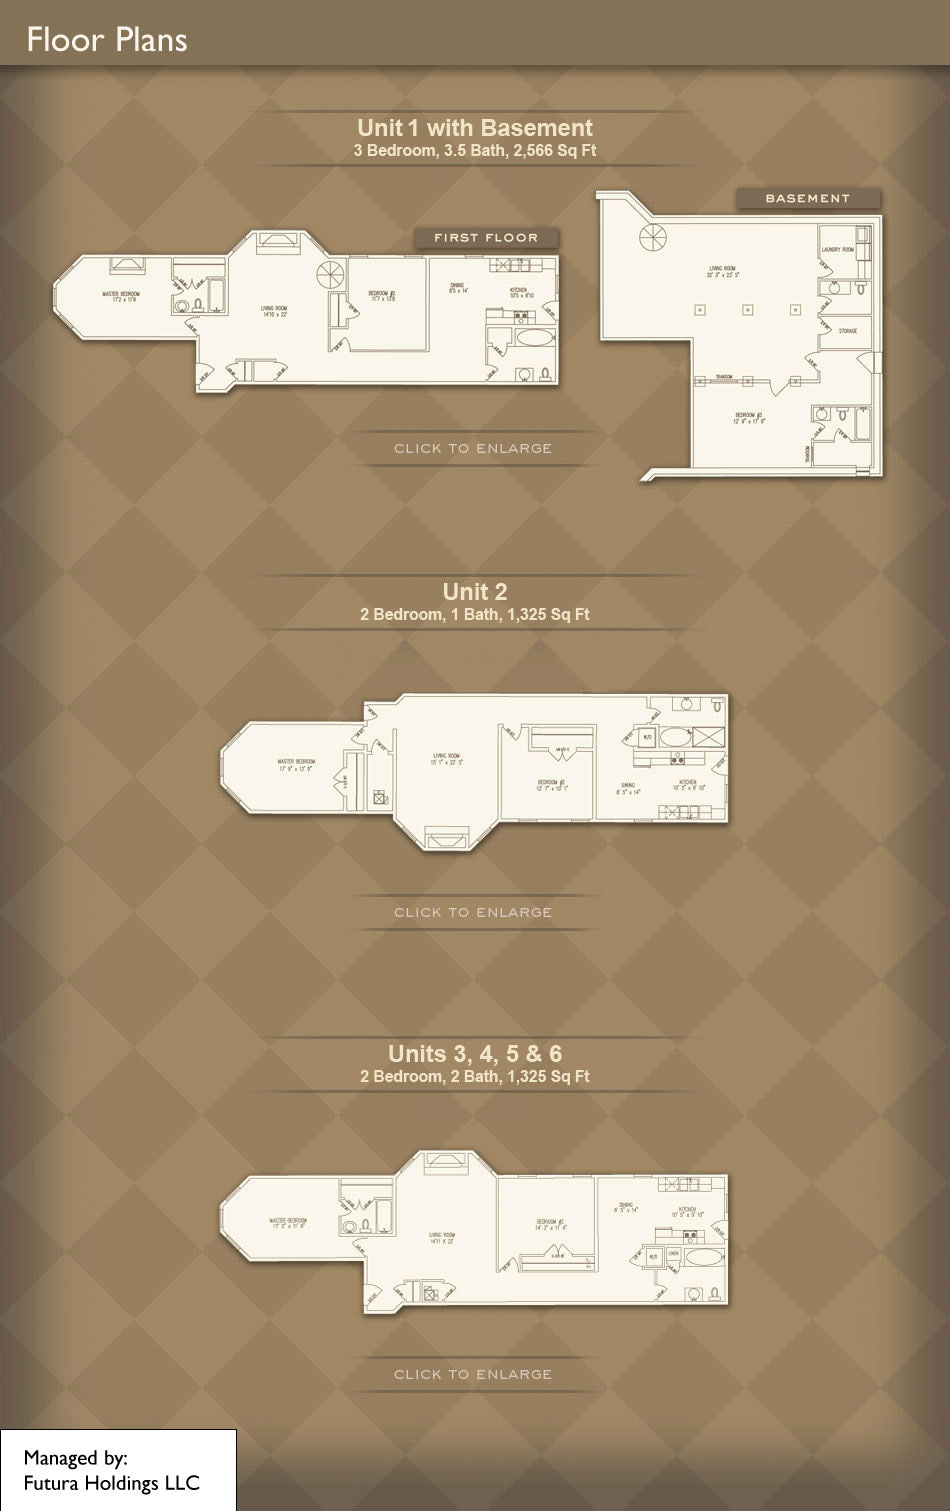 Highland Lofts Condos Floor Plans and Pricing